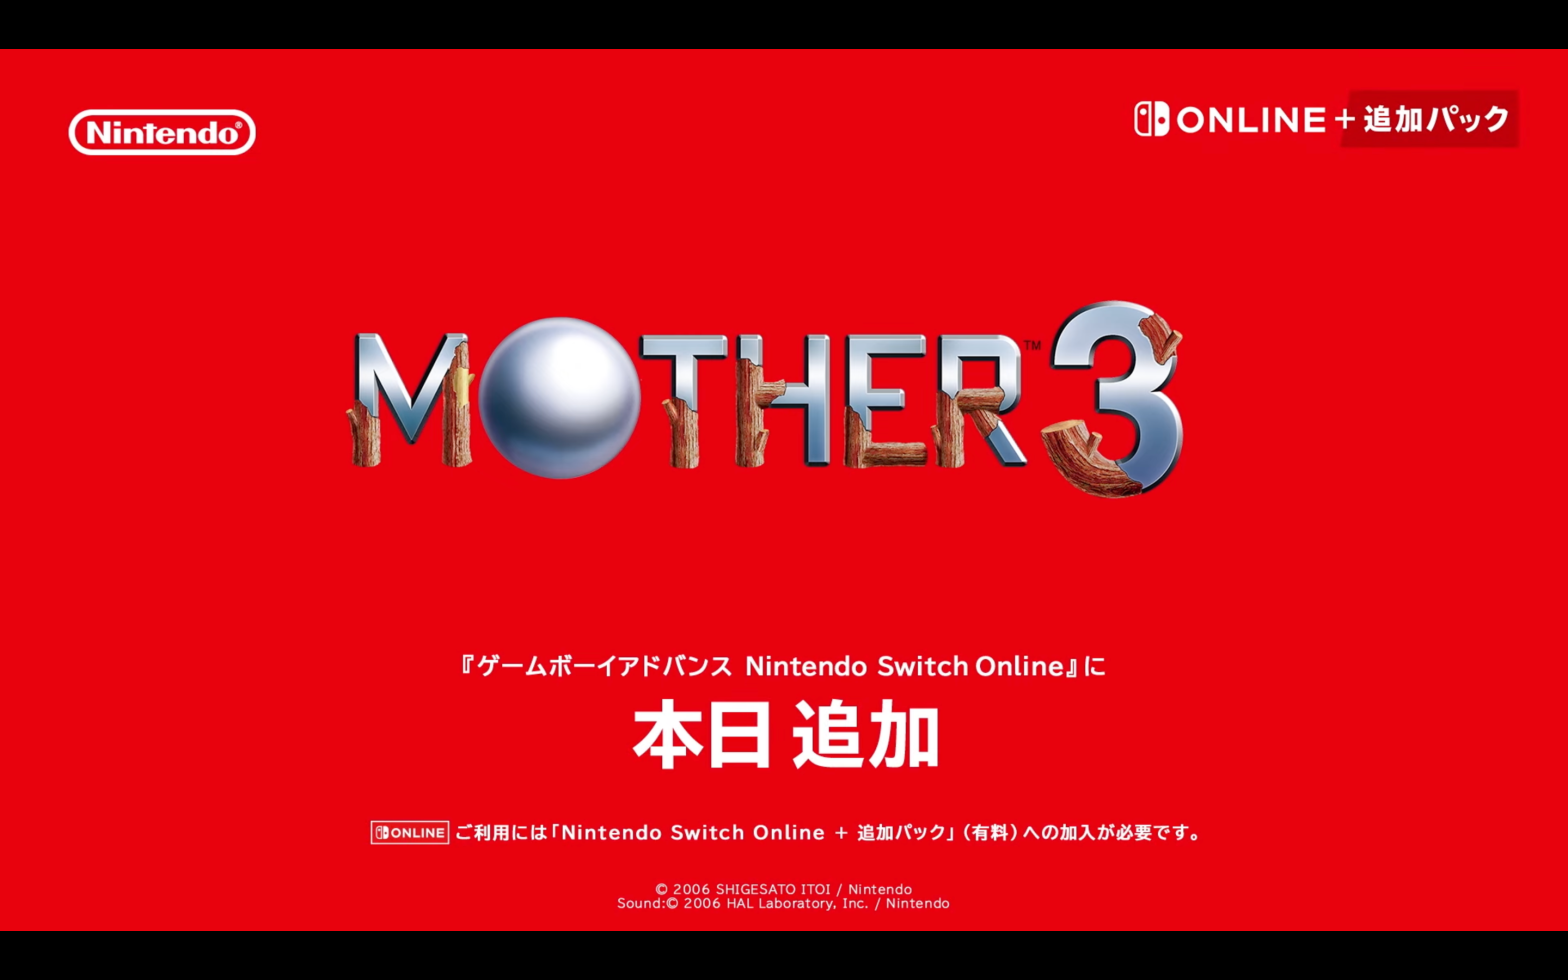 Nintendo Is Bringing Mother 3 To Switch Online, But Only In Japan